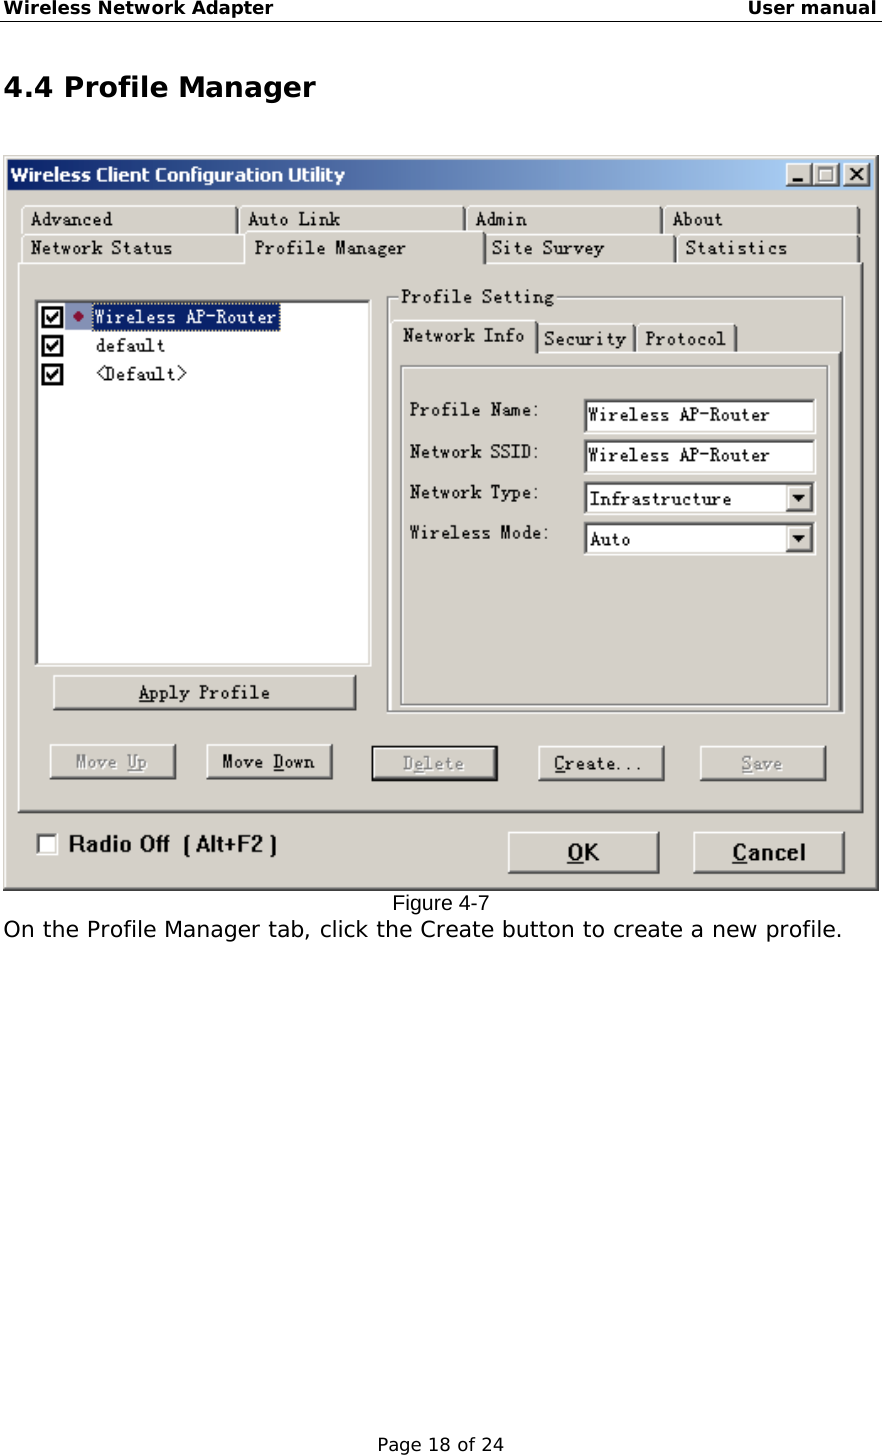 Wireless Network Adapter                                                    User manual Page 18 of 24 4.4 Profile Manager   Figure 4-7 On the Profile Manager tab, click the Create button to create a new profile. 